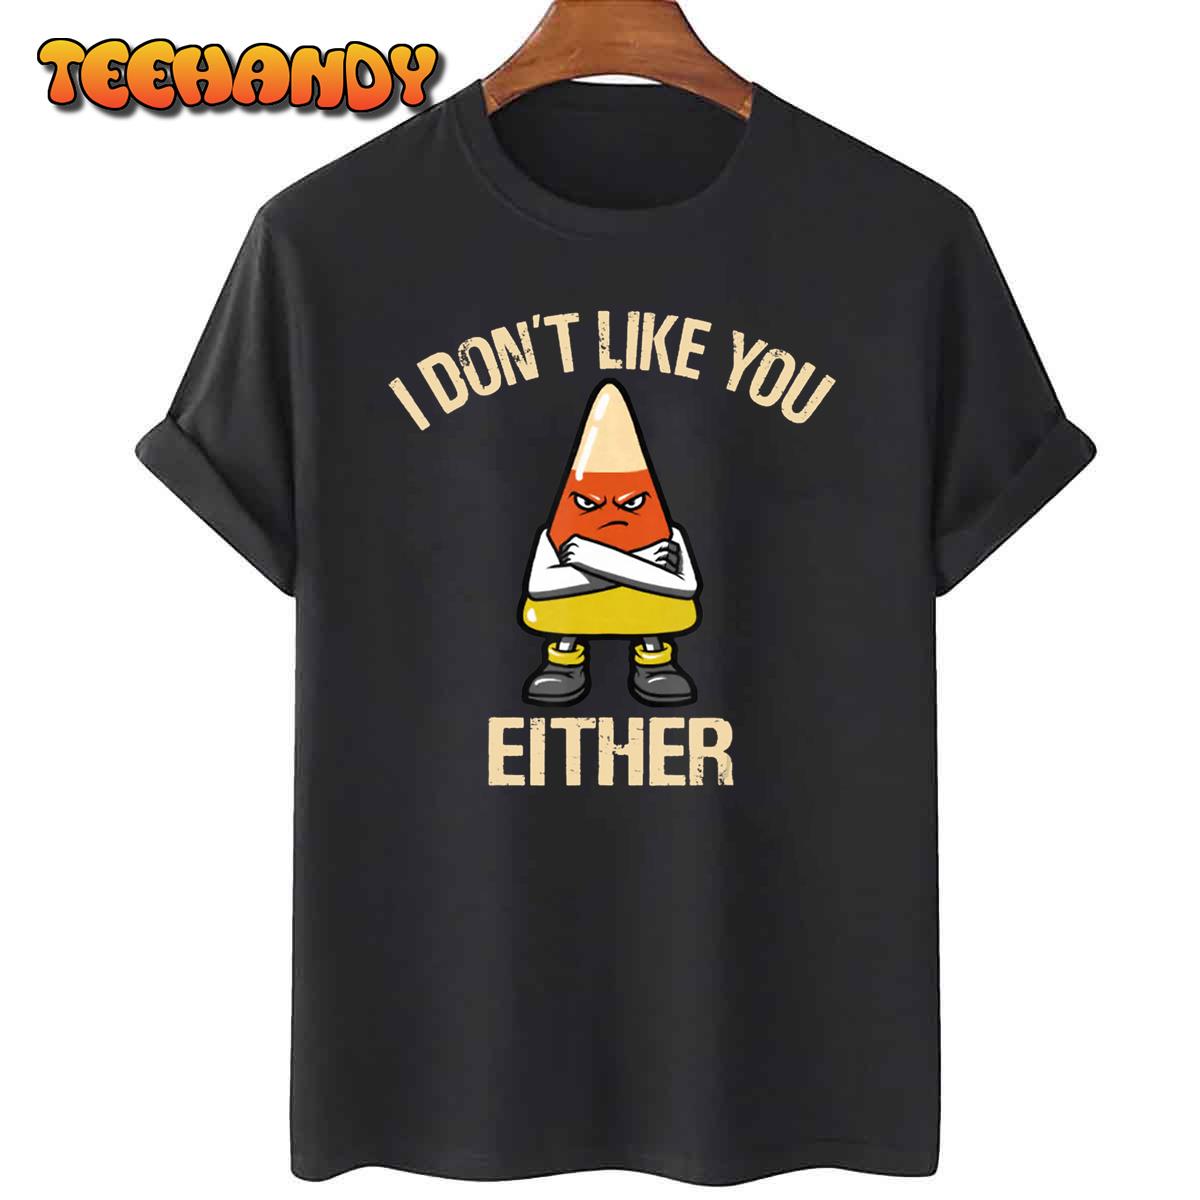 I Don't Like You Either Funny Halloween Candy Corn T-Shirt